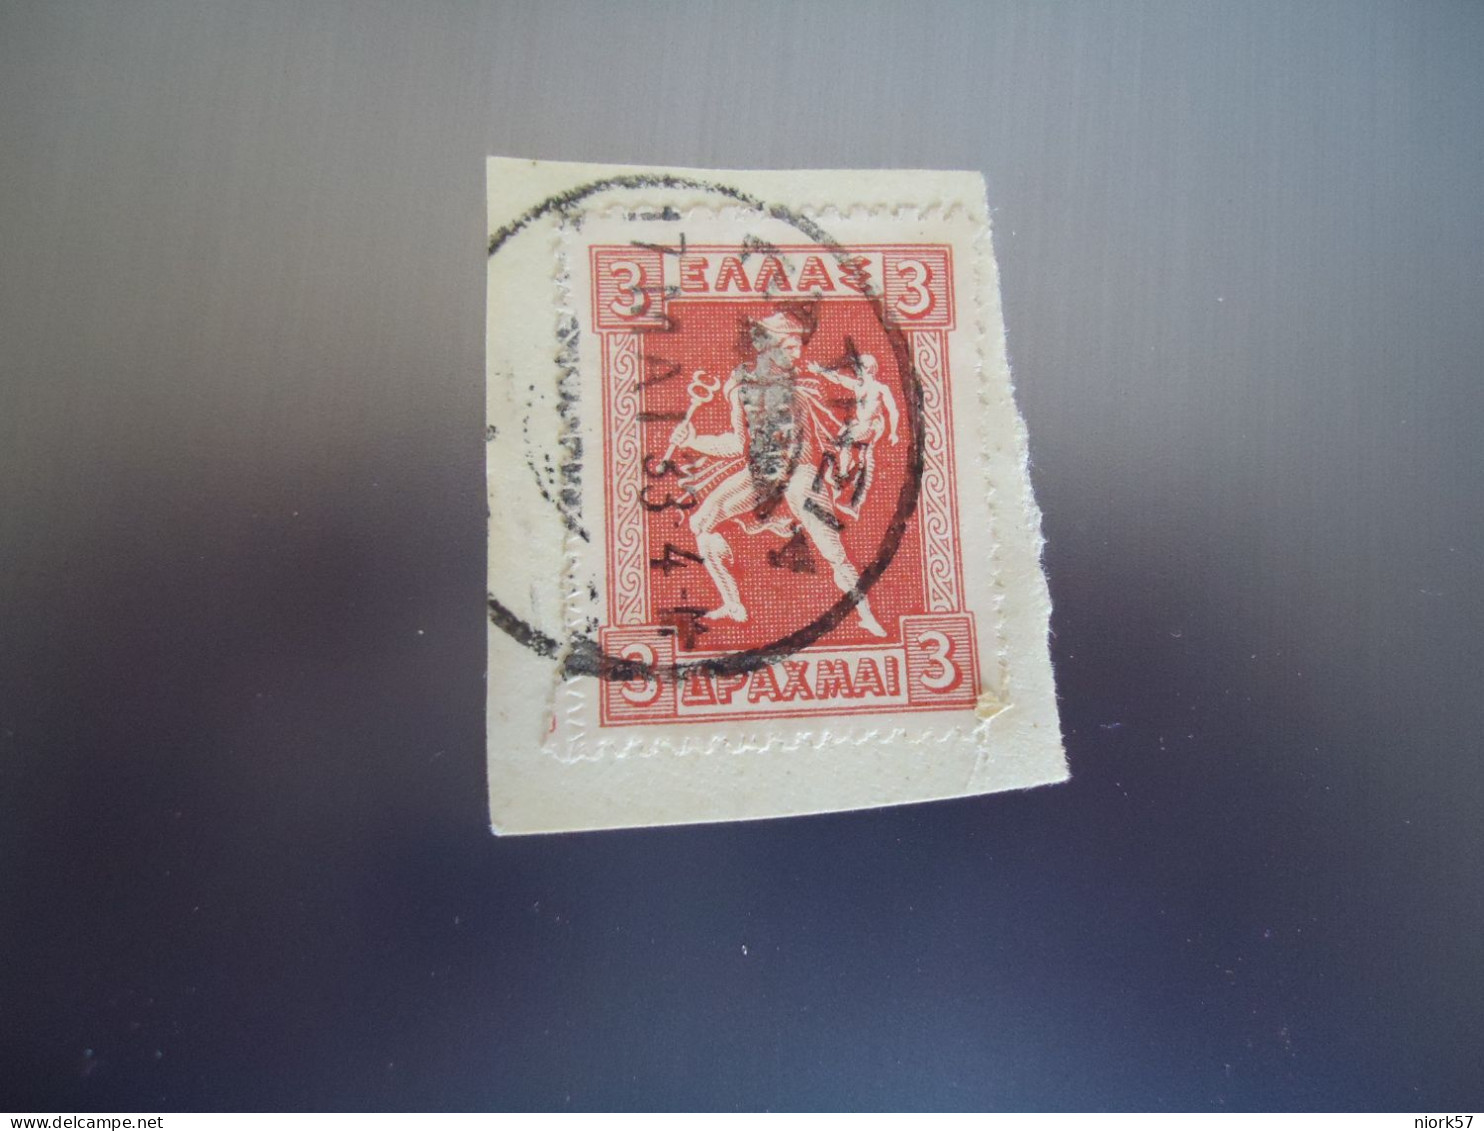 GREECE  USED STAMPS POSTMARK   ΑΘΗΝΑΙ ΠΑΤΗΣΙΑ  1933 - Affrancature Meccaniche Rosse (EMA)